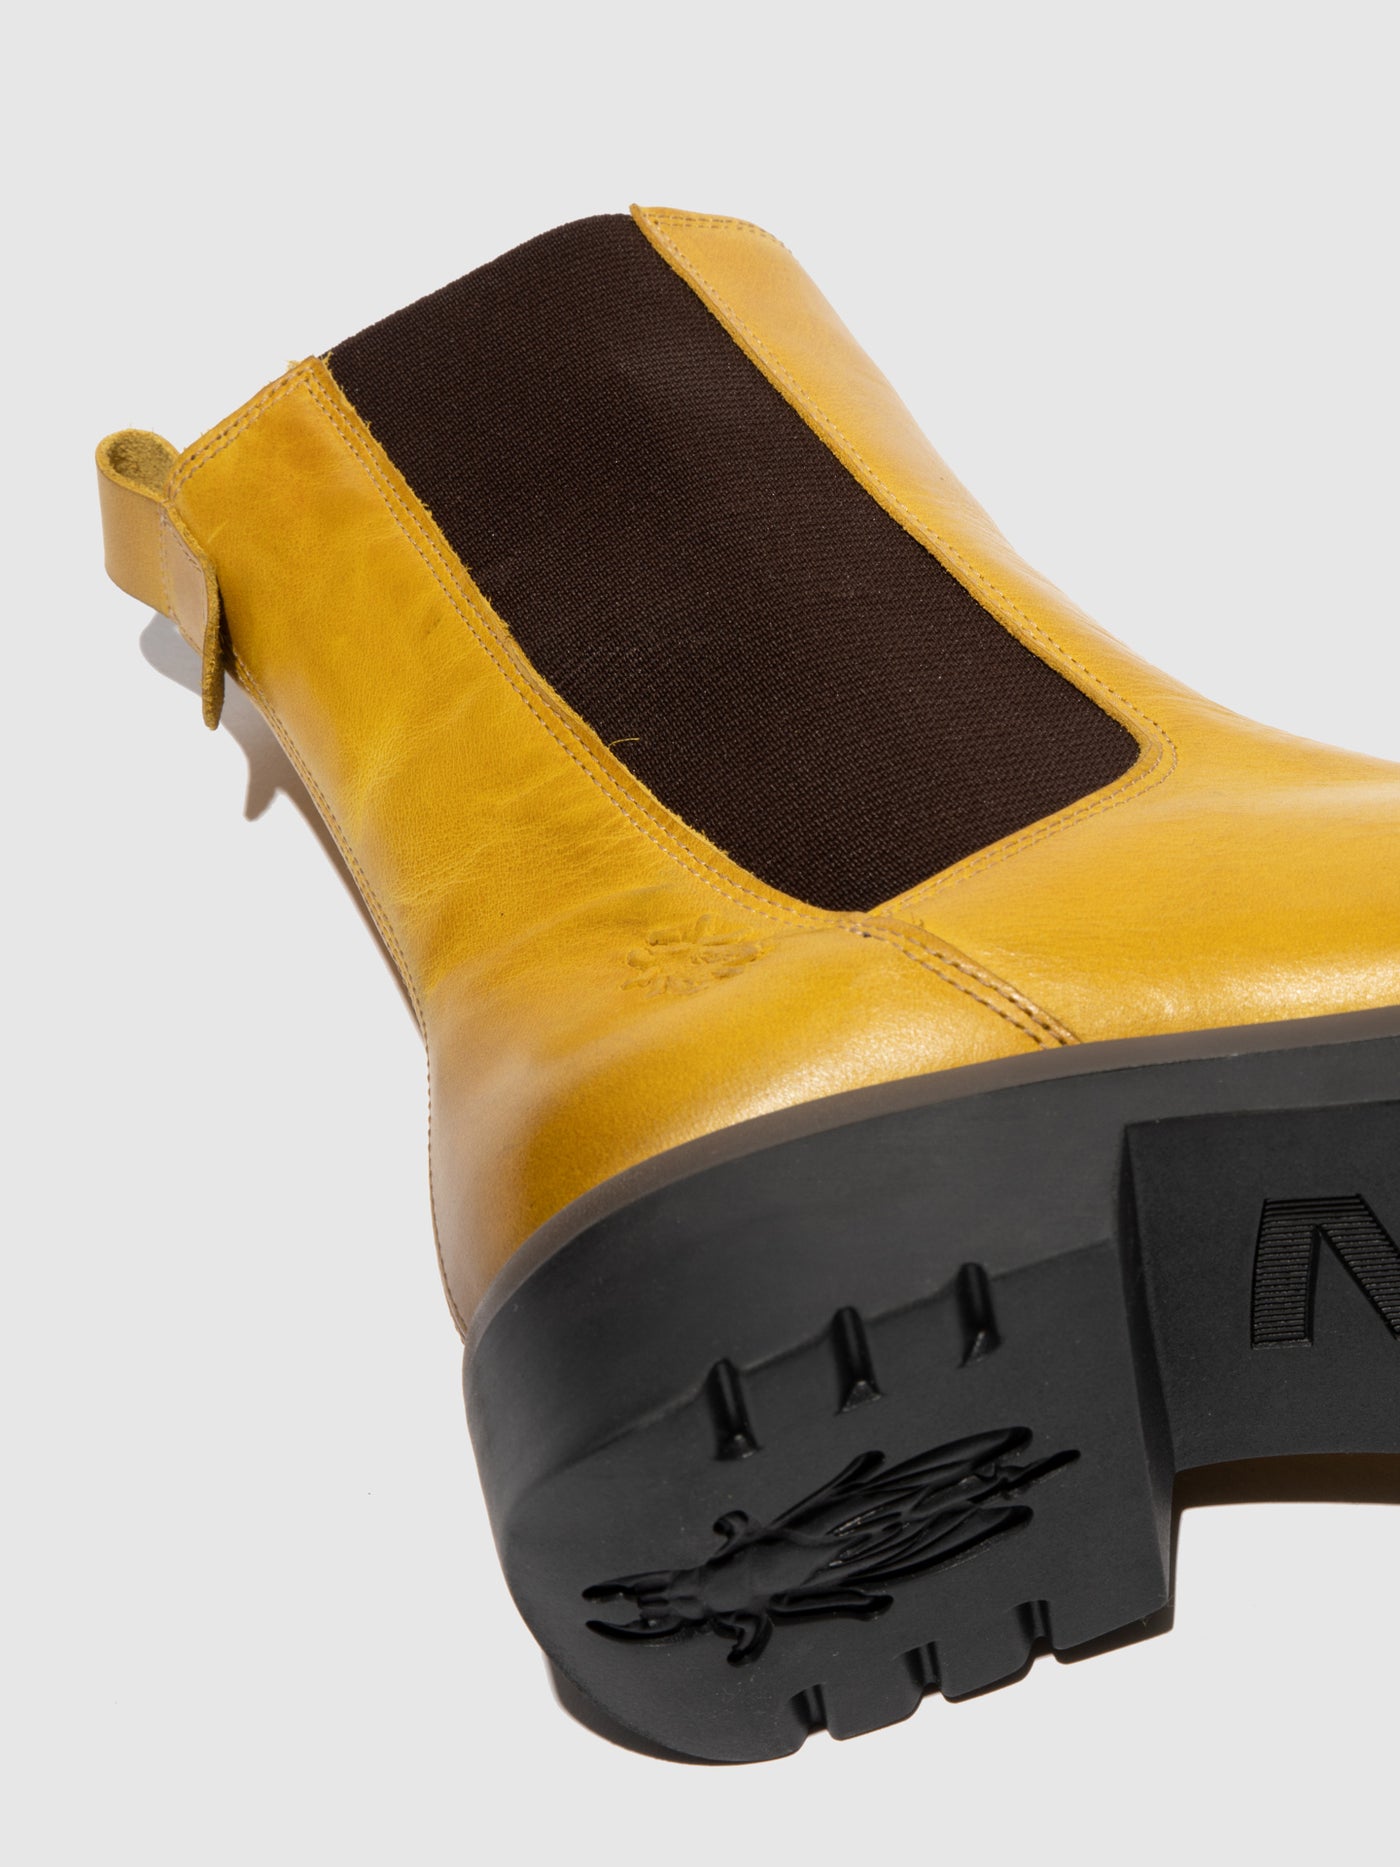 Chelsea Ankle Boots REIN795FLY RUG MUSTARD